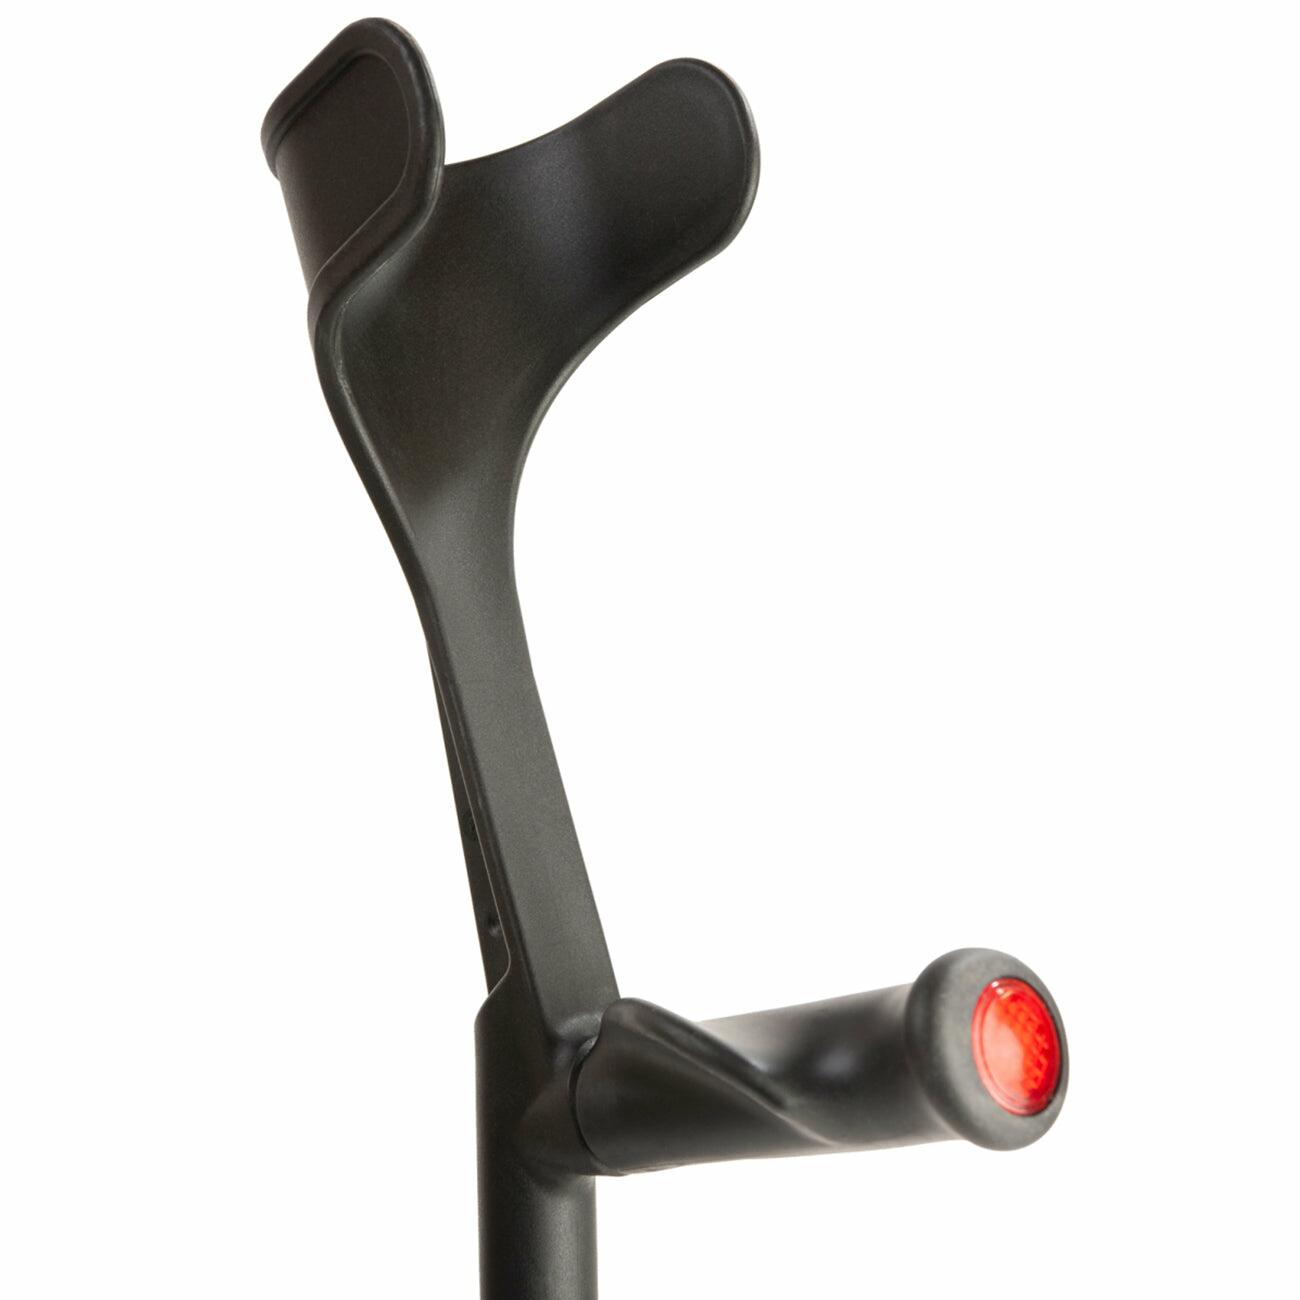 Comfort grip handle and open cuff of a black Flexyfoot Comfort Grip Open Cuff Crutch